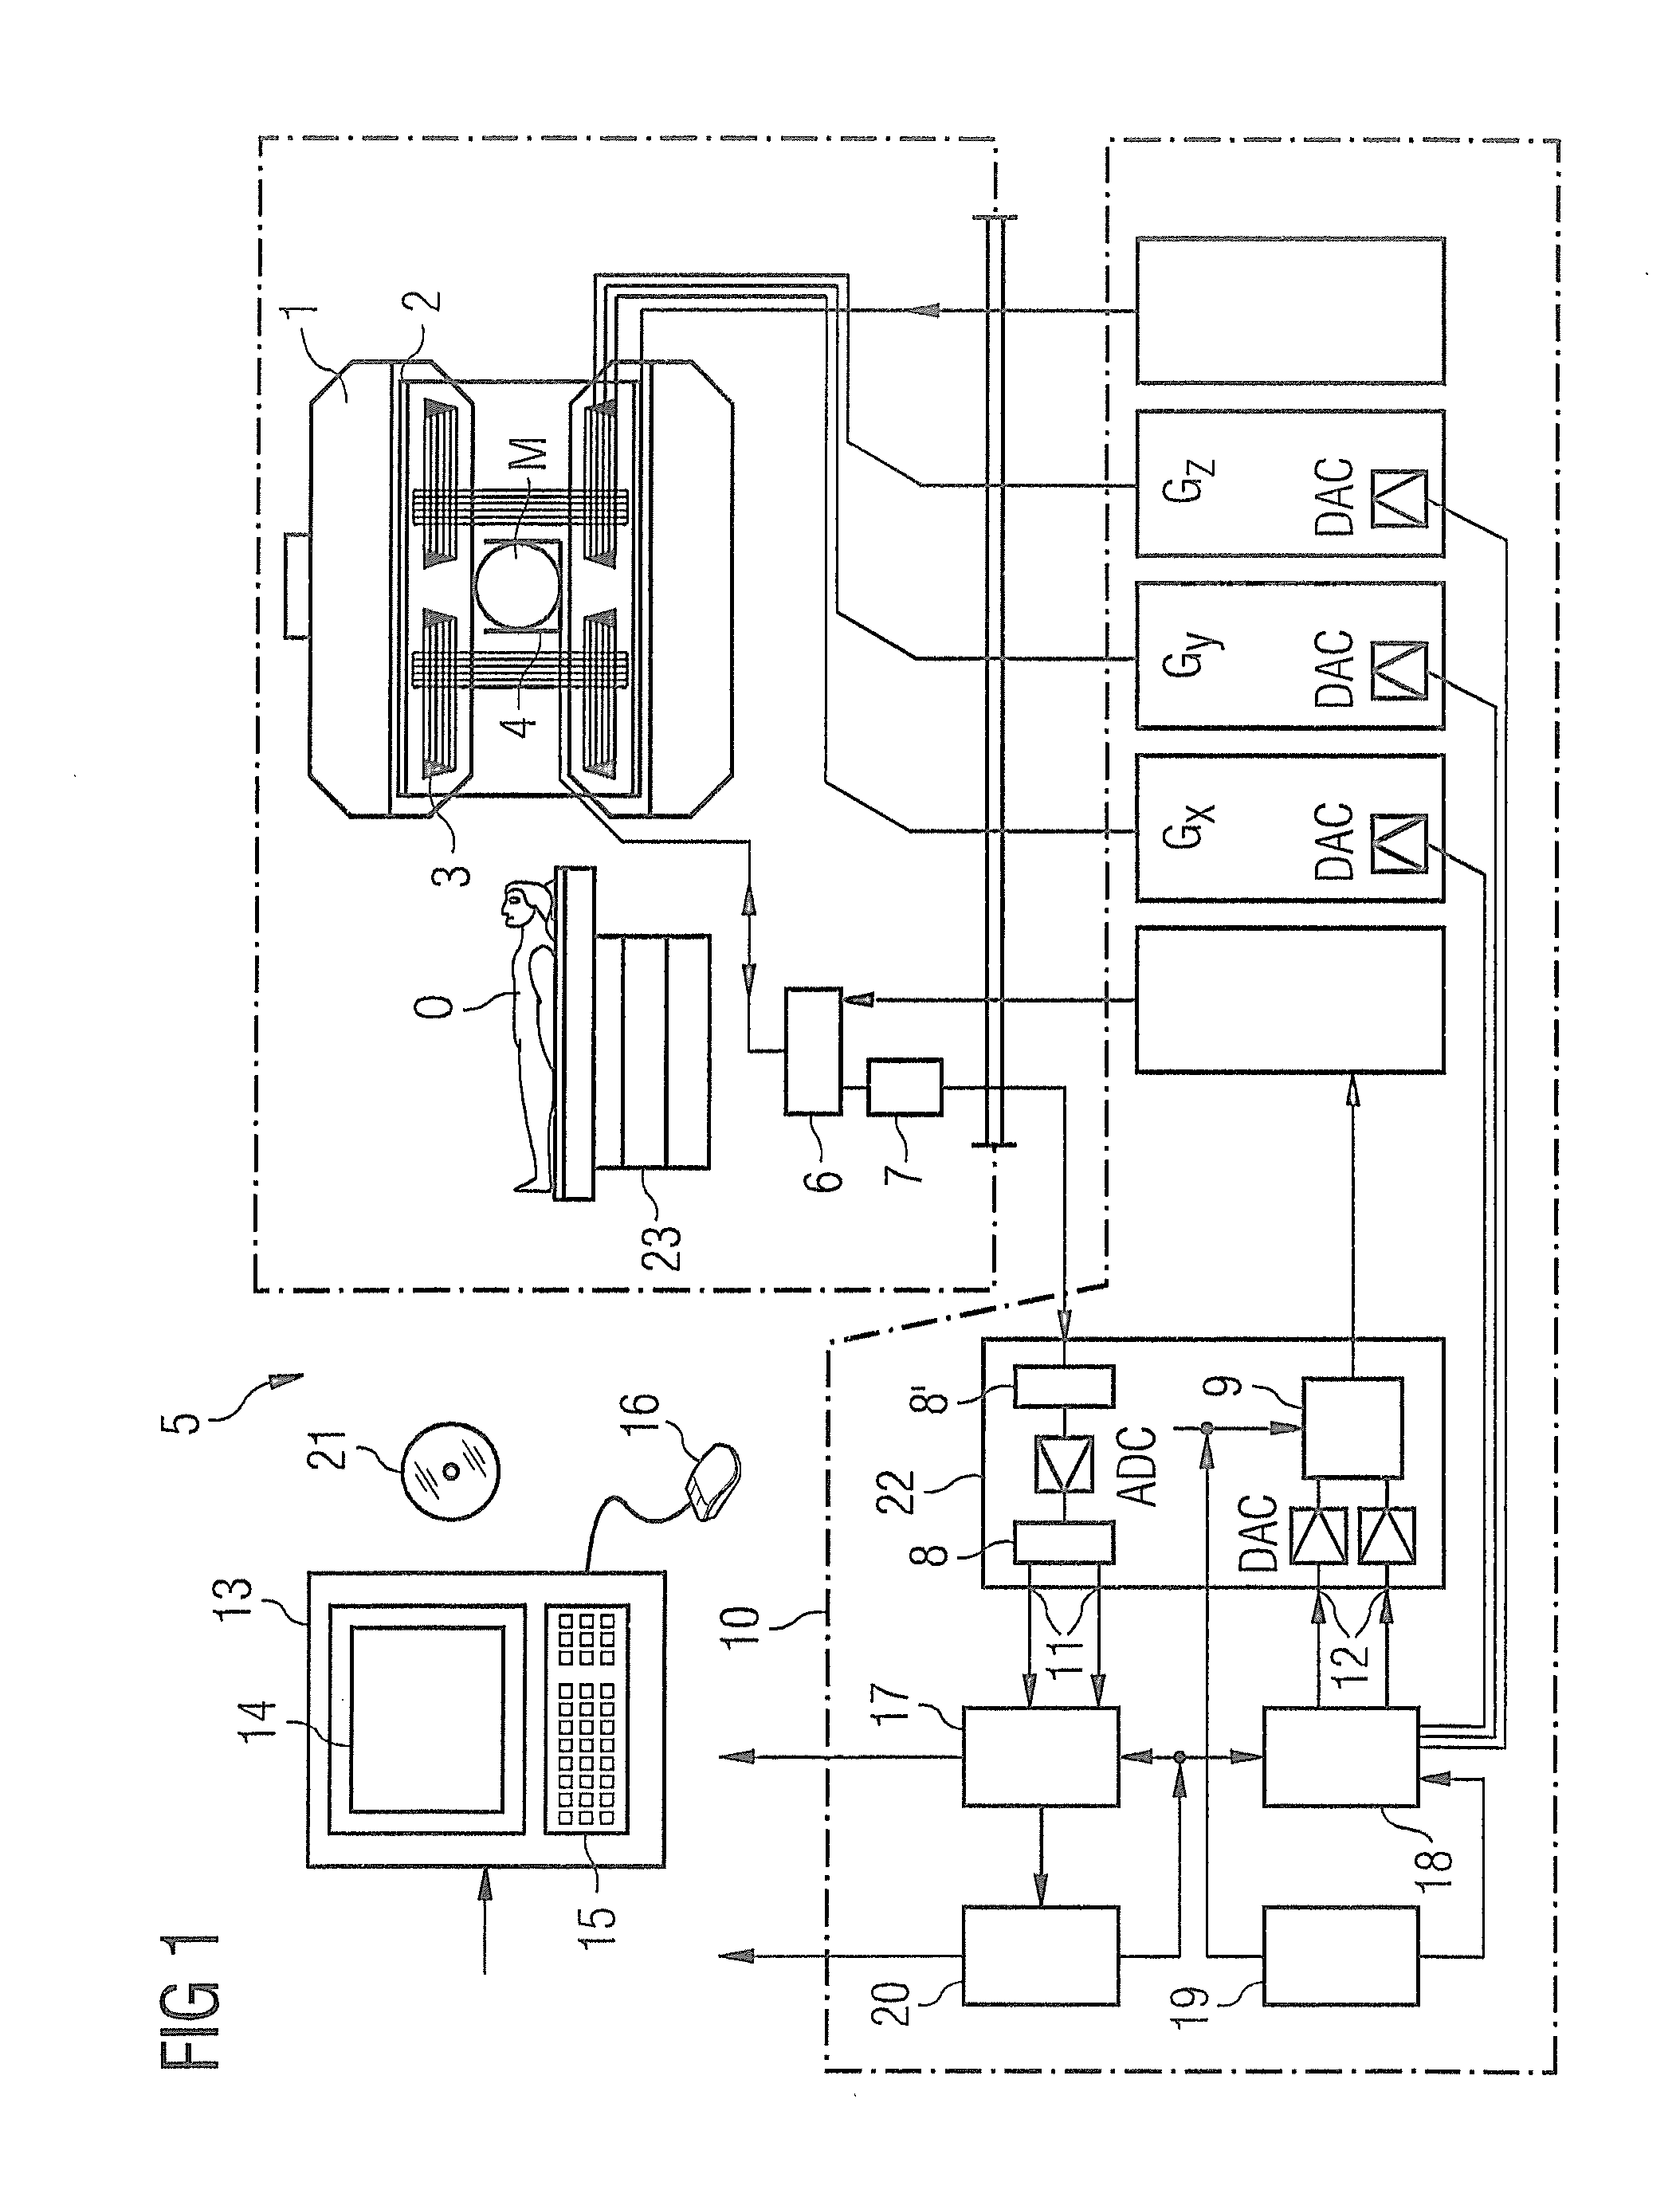 Magnetic resonance system and method to acquire mr data and to determine a b1 magnetic field